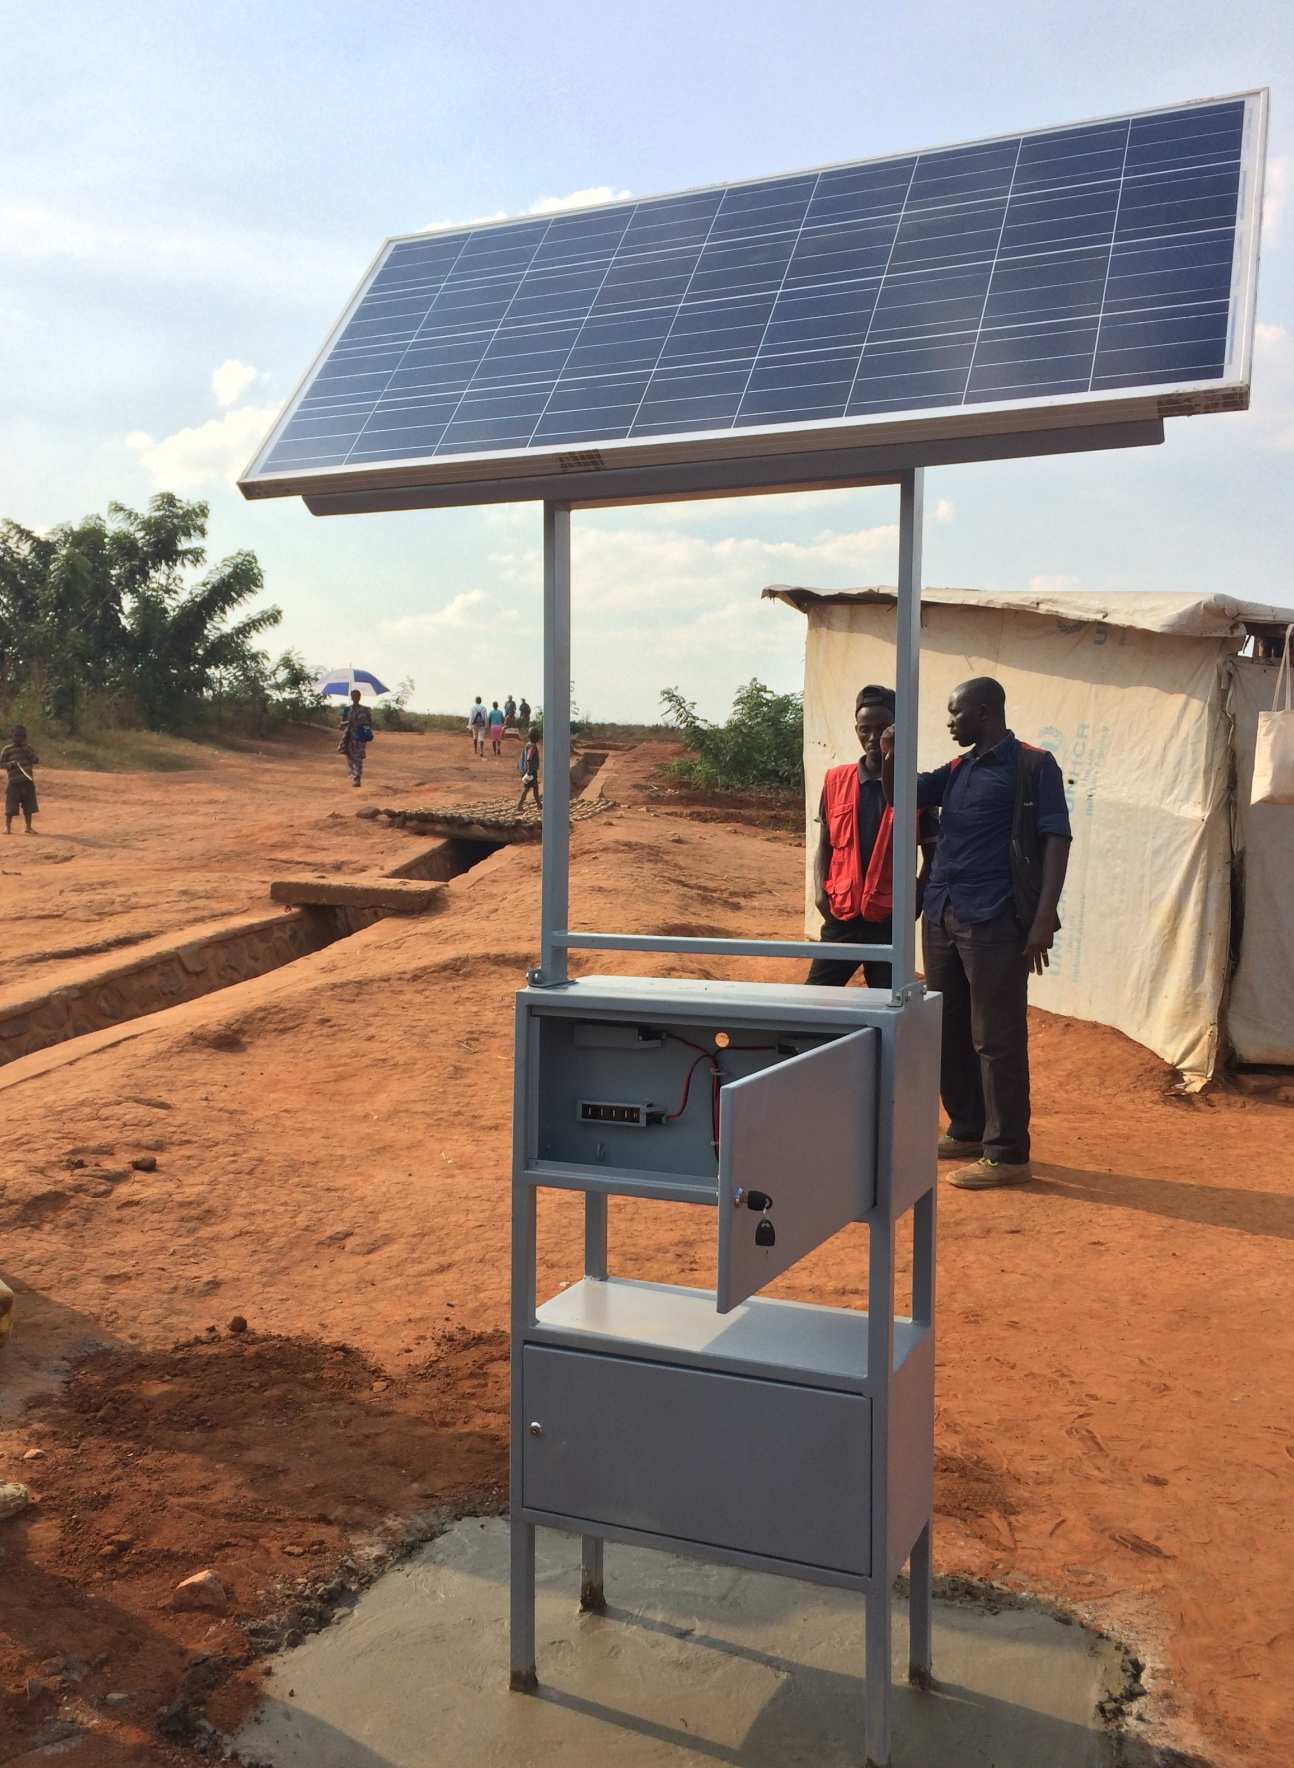 An Elpis Solar charging station